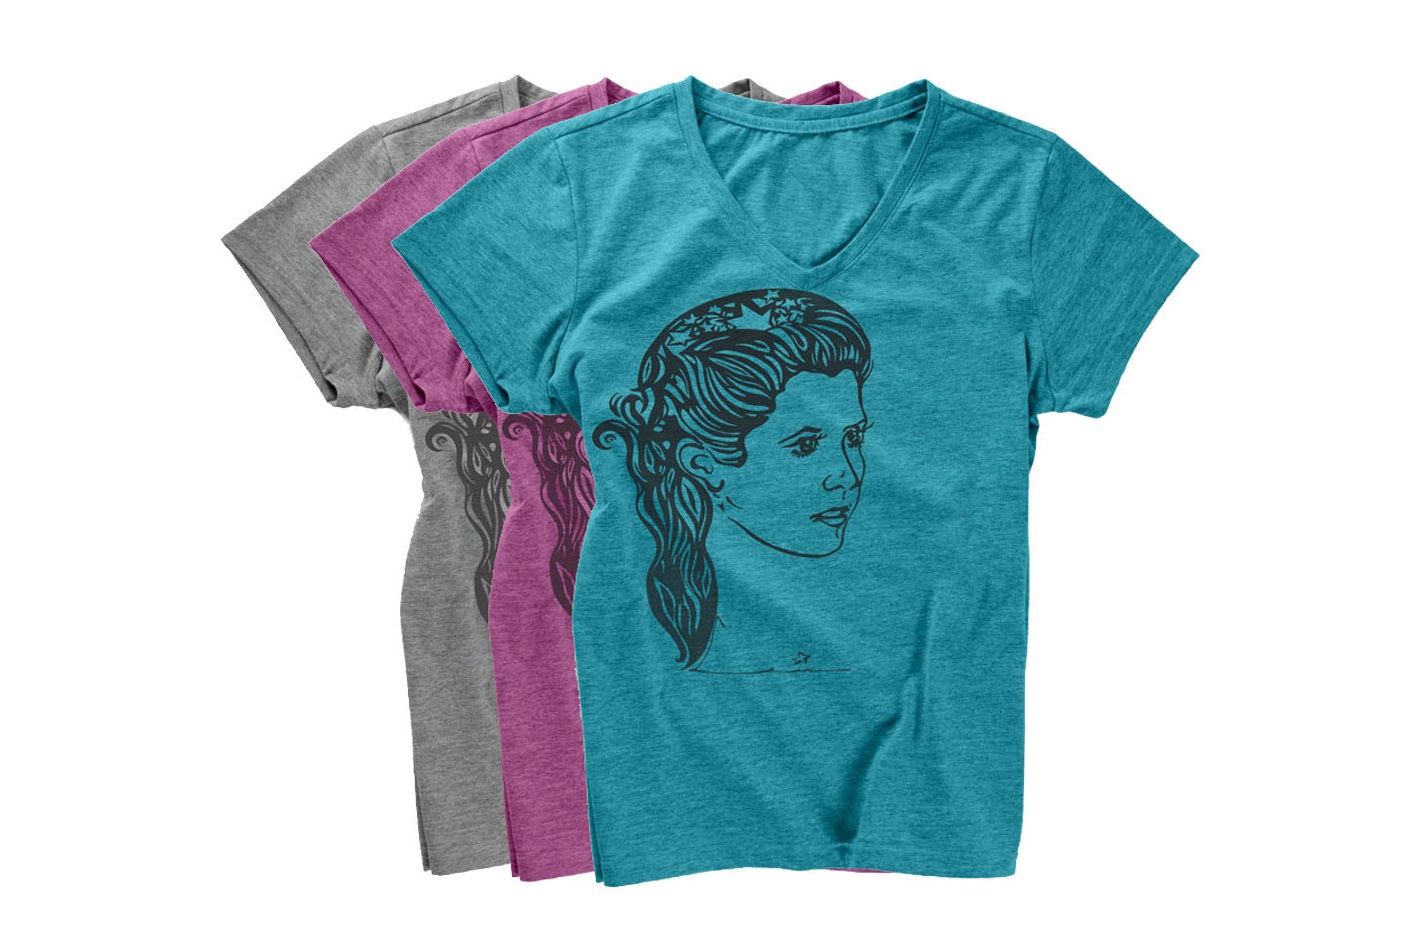 Women's Star Wars Princess Leia T-Shirts by Go With Music on Etsy